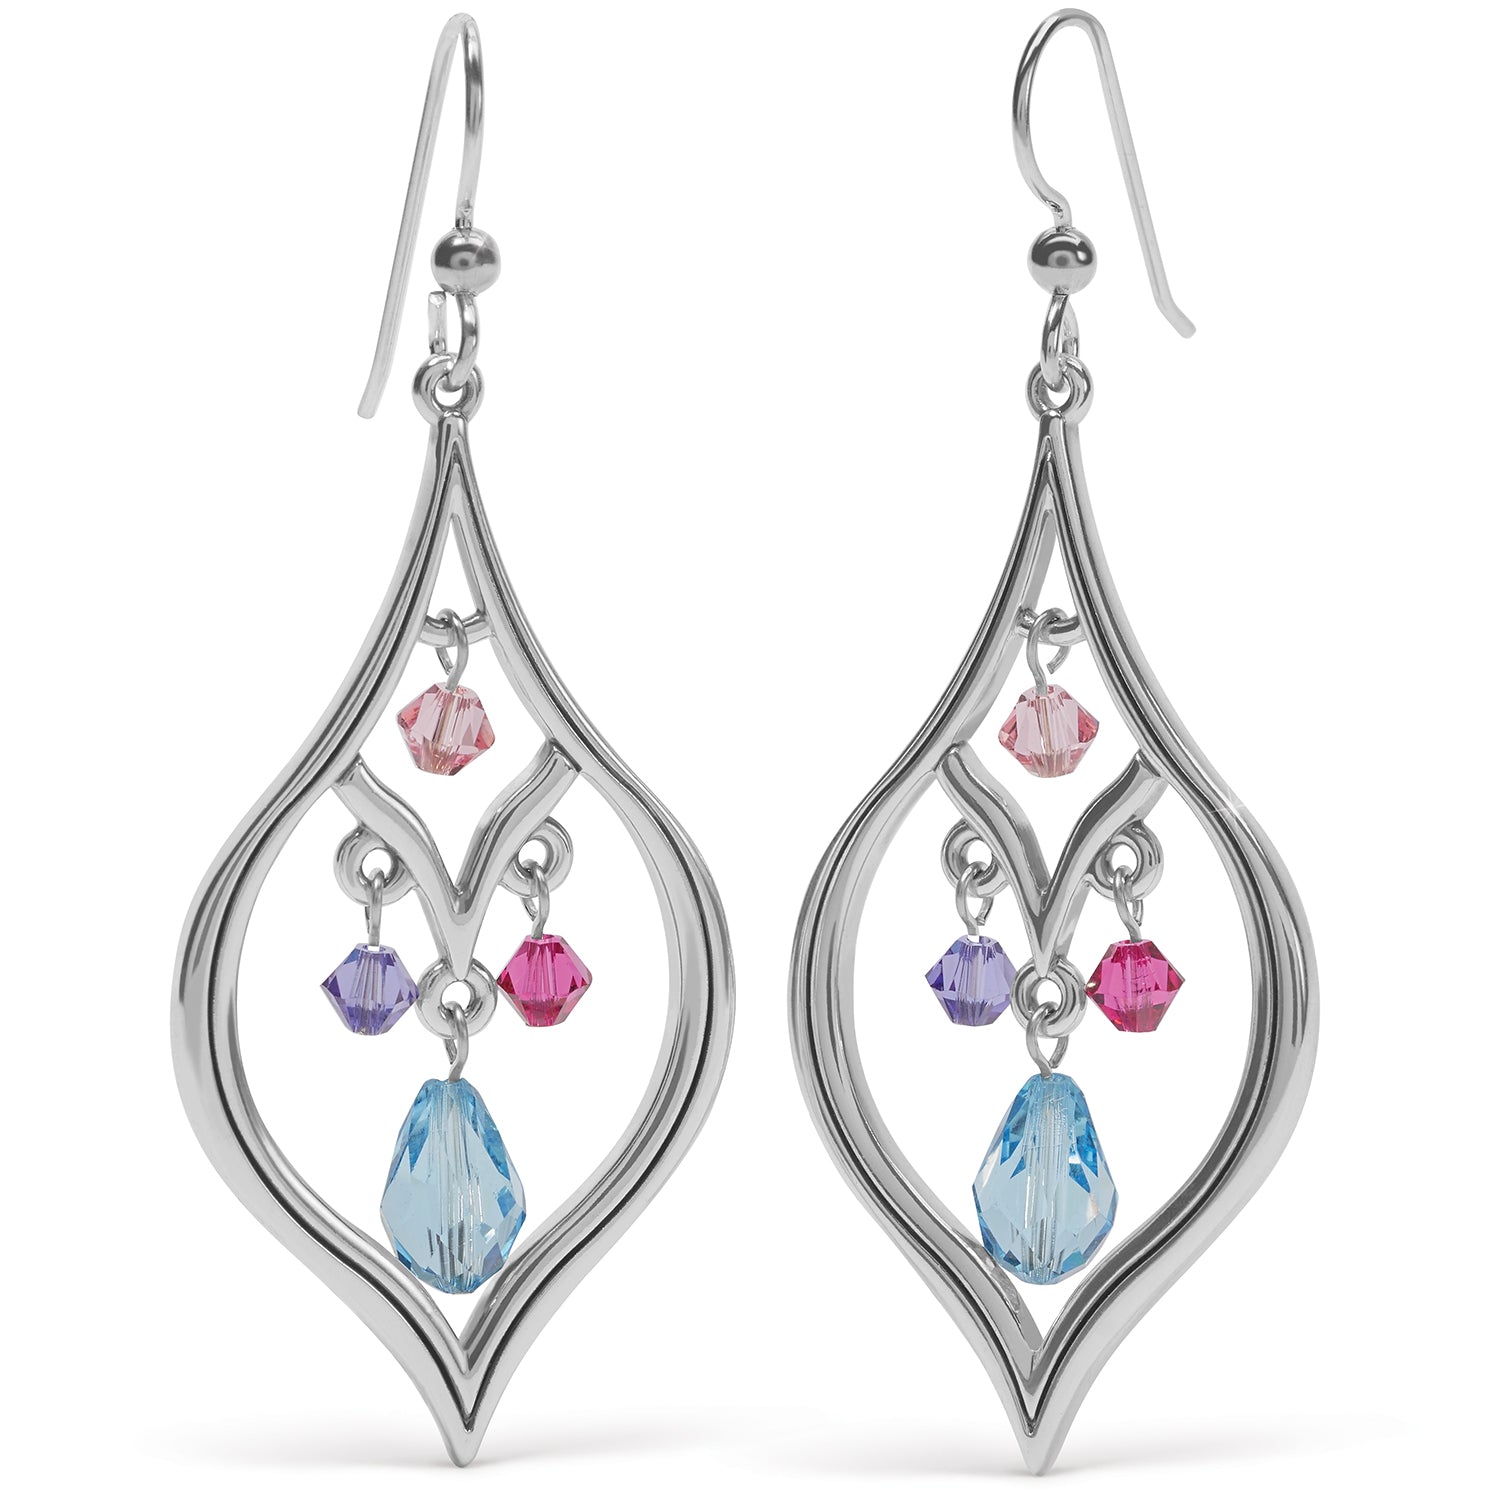 Prism Lights Drops French Wire Earrings